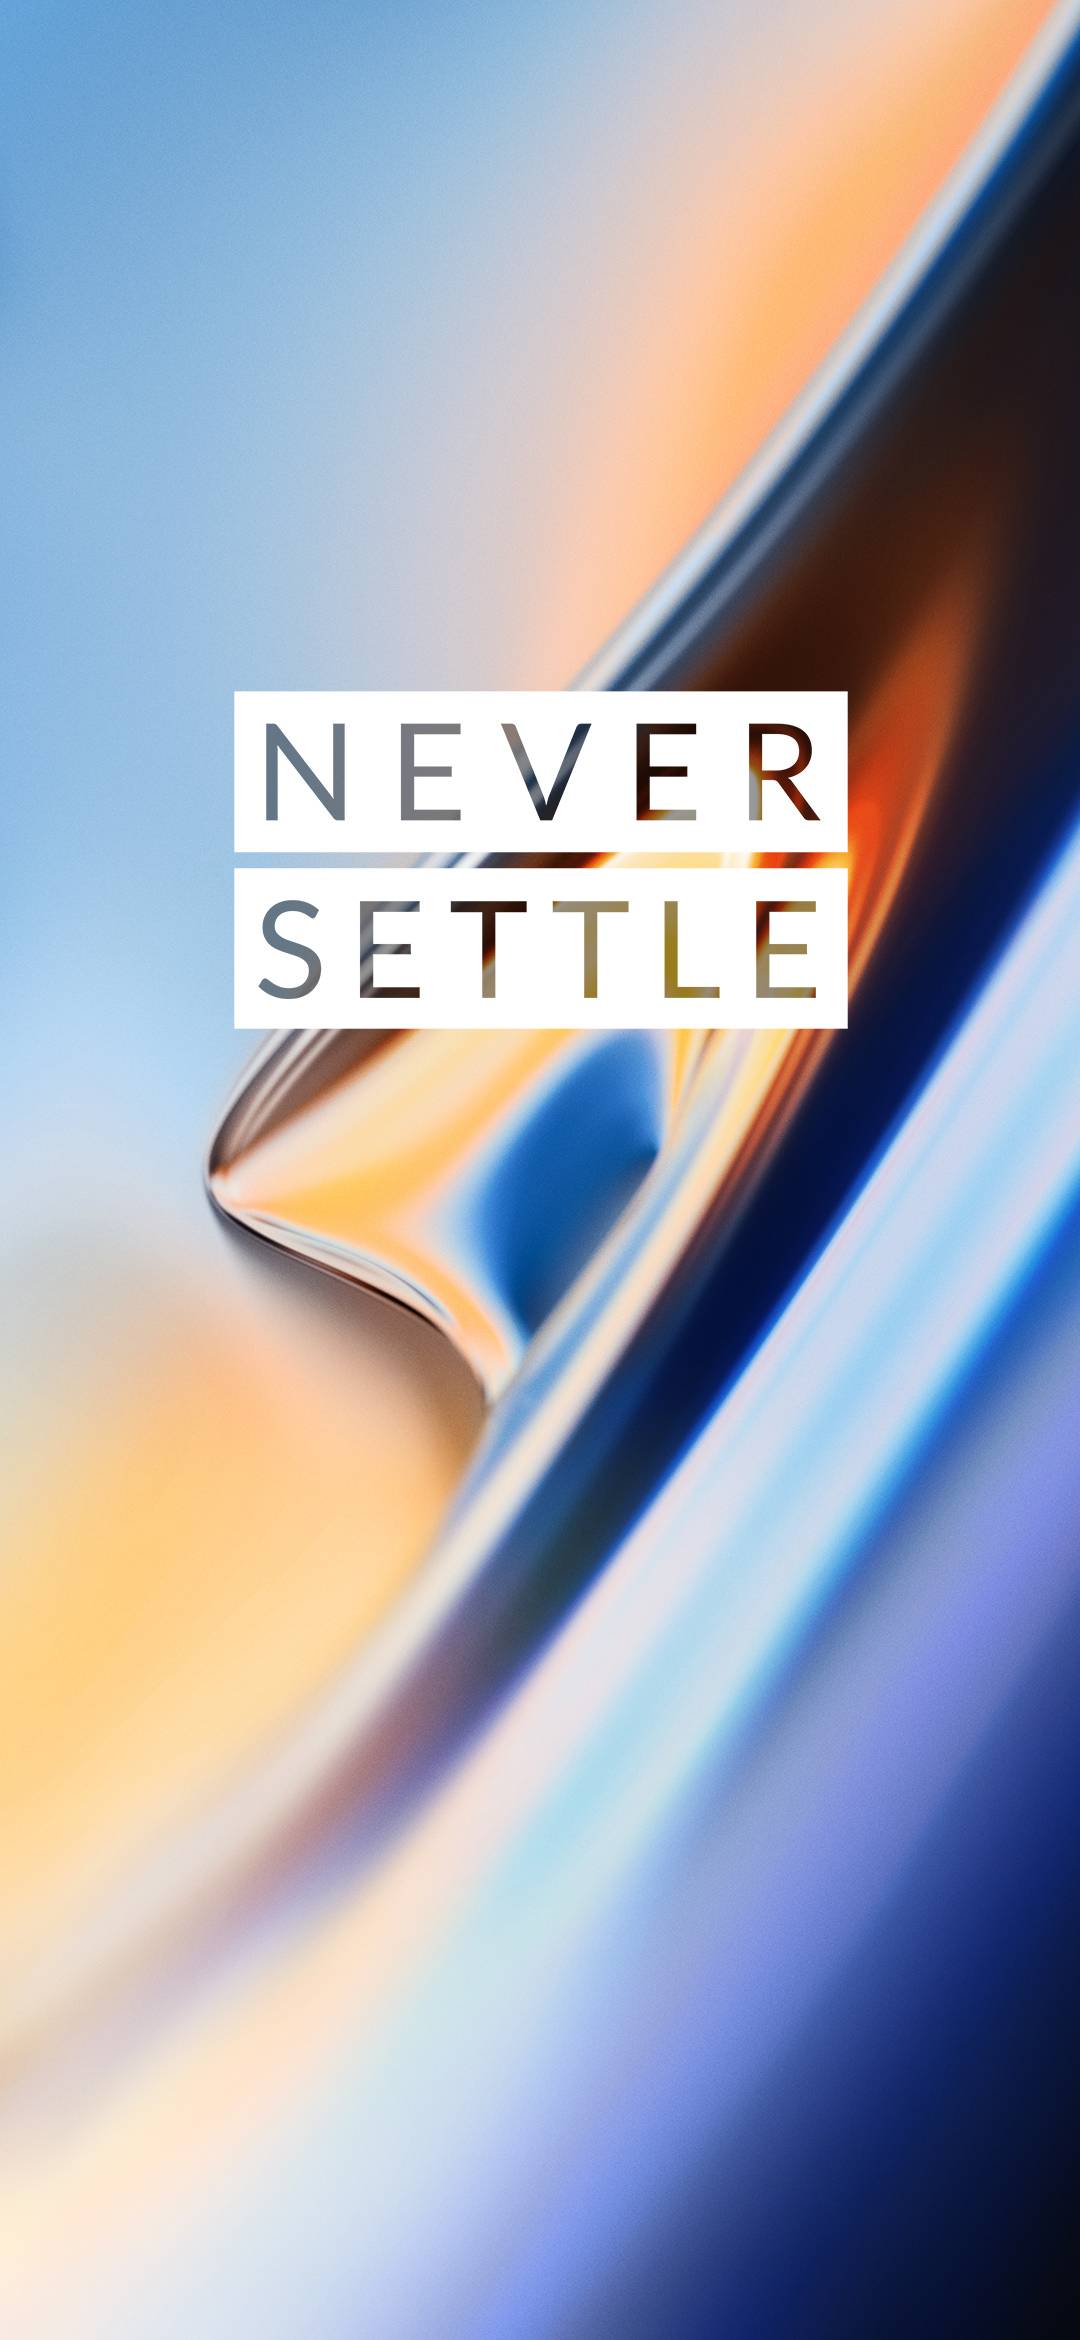 Best Abstract Image From Oneplus 6t Wallpaper